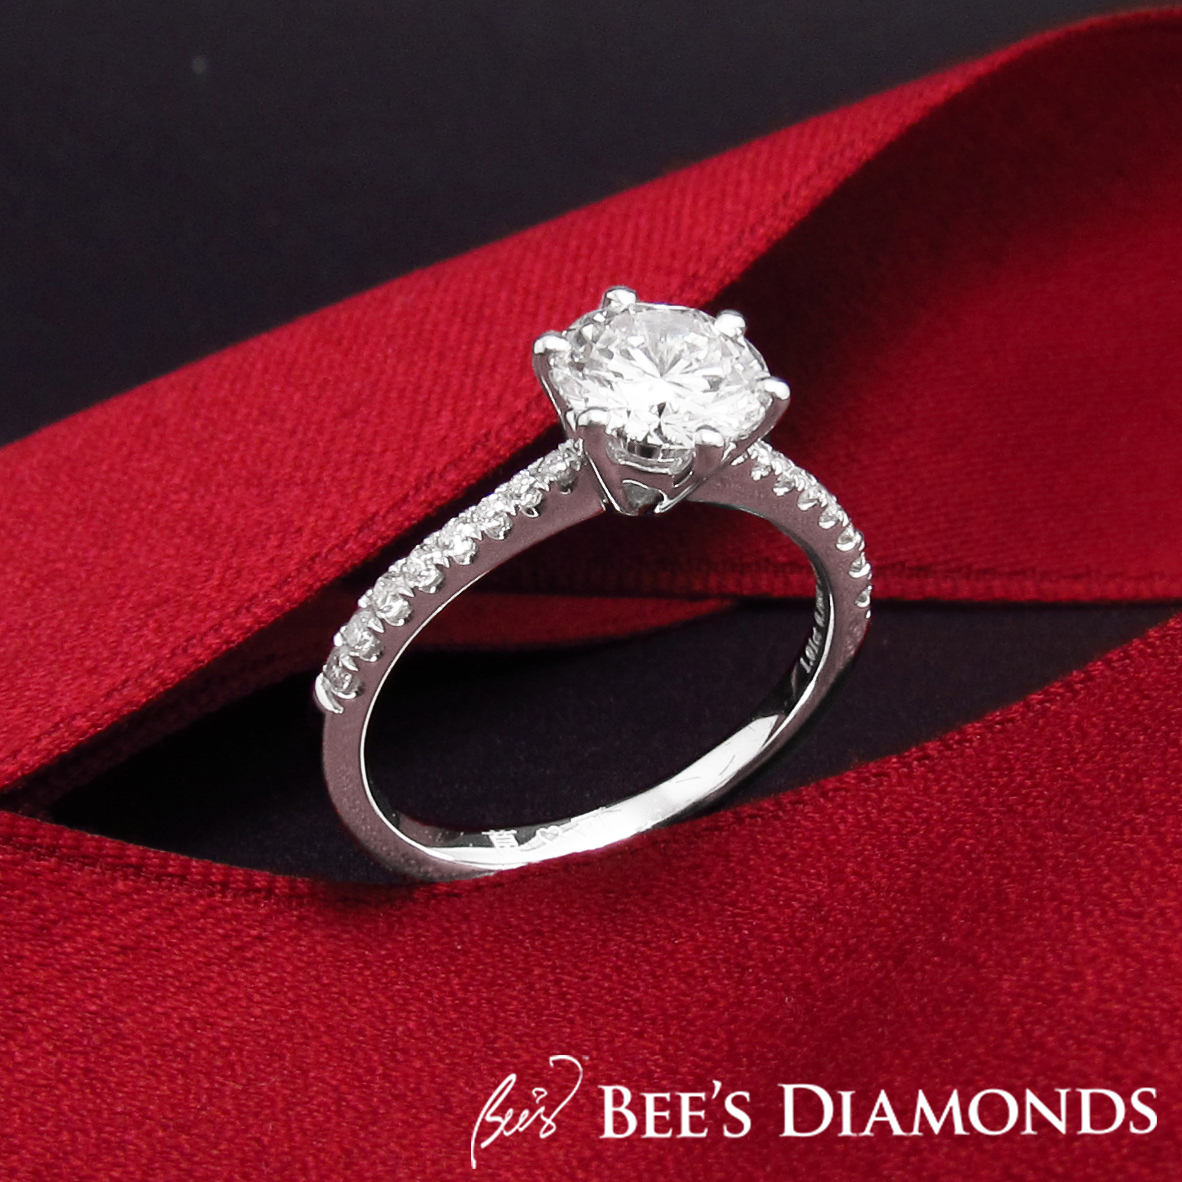 Solitaire diamond ring with decreasing size of small diamonds on bands